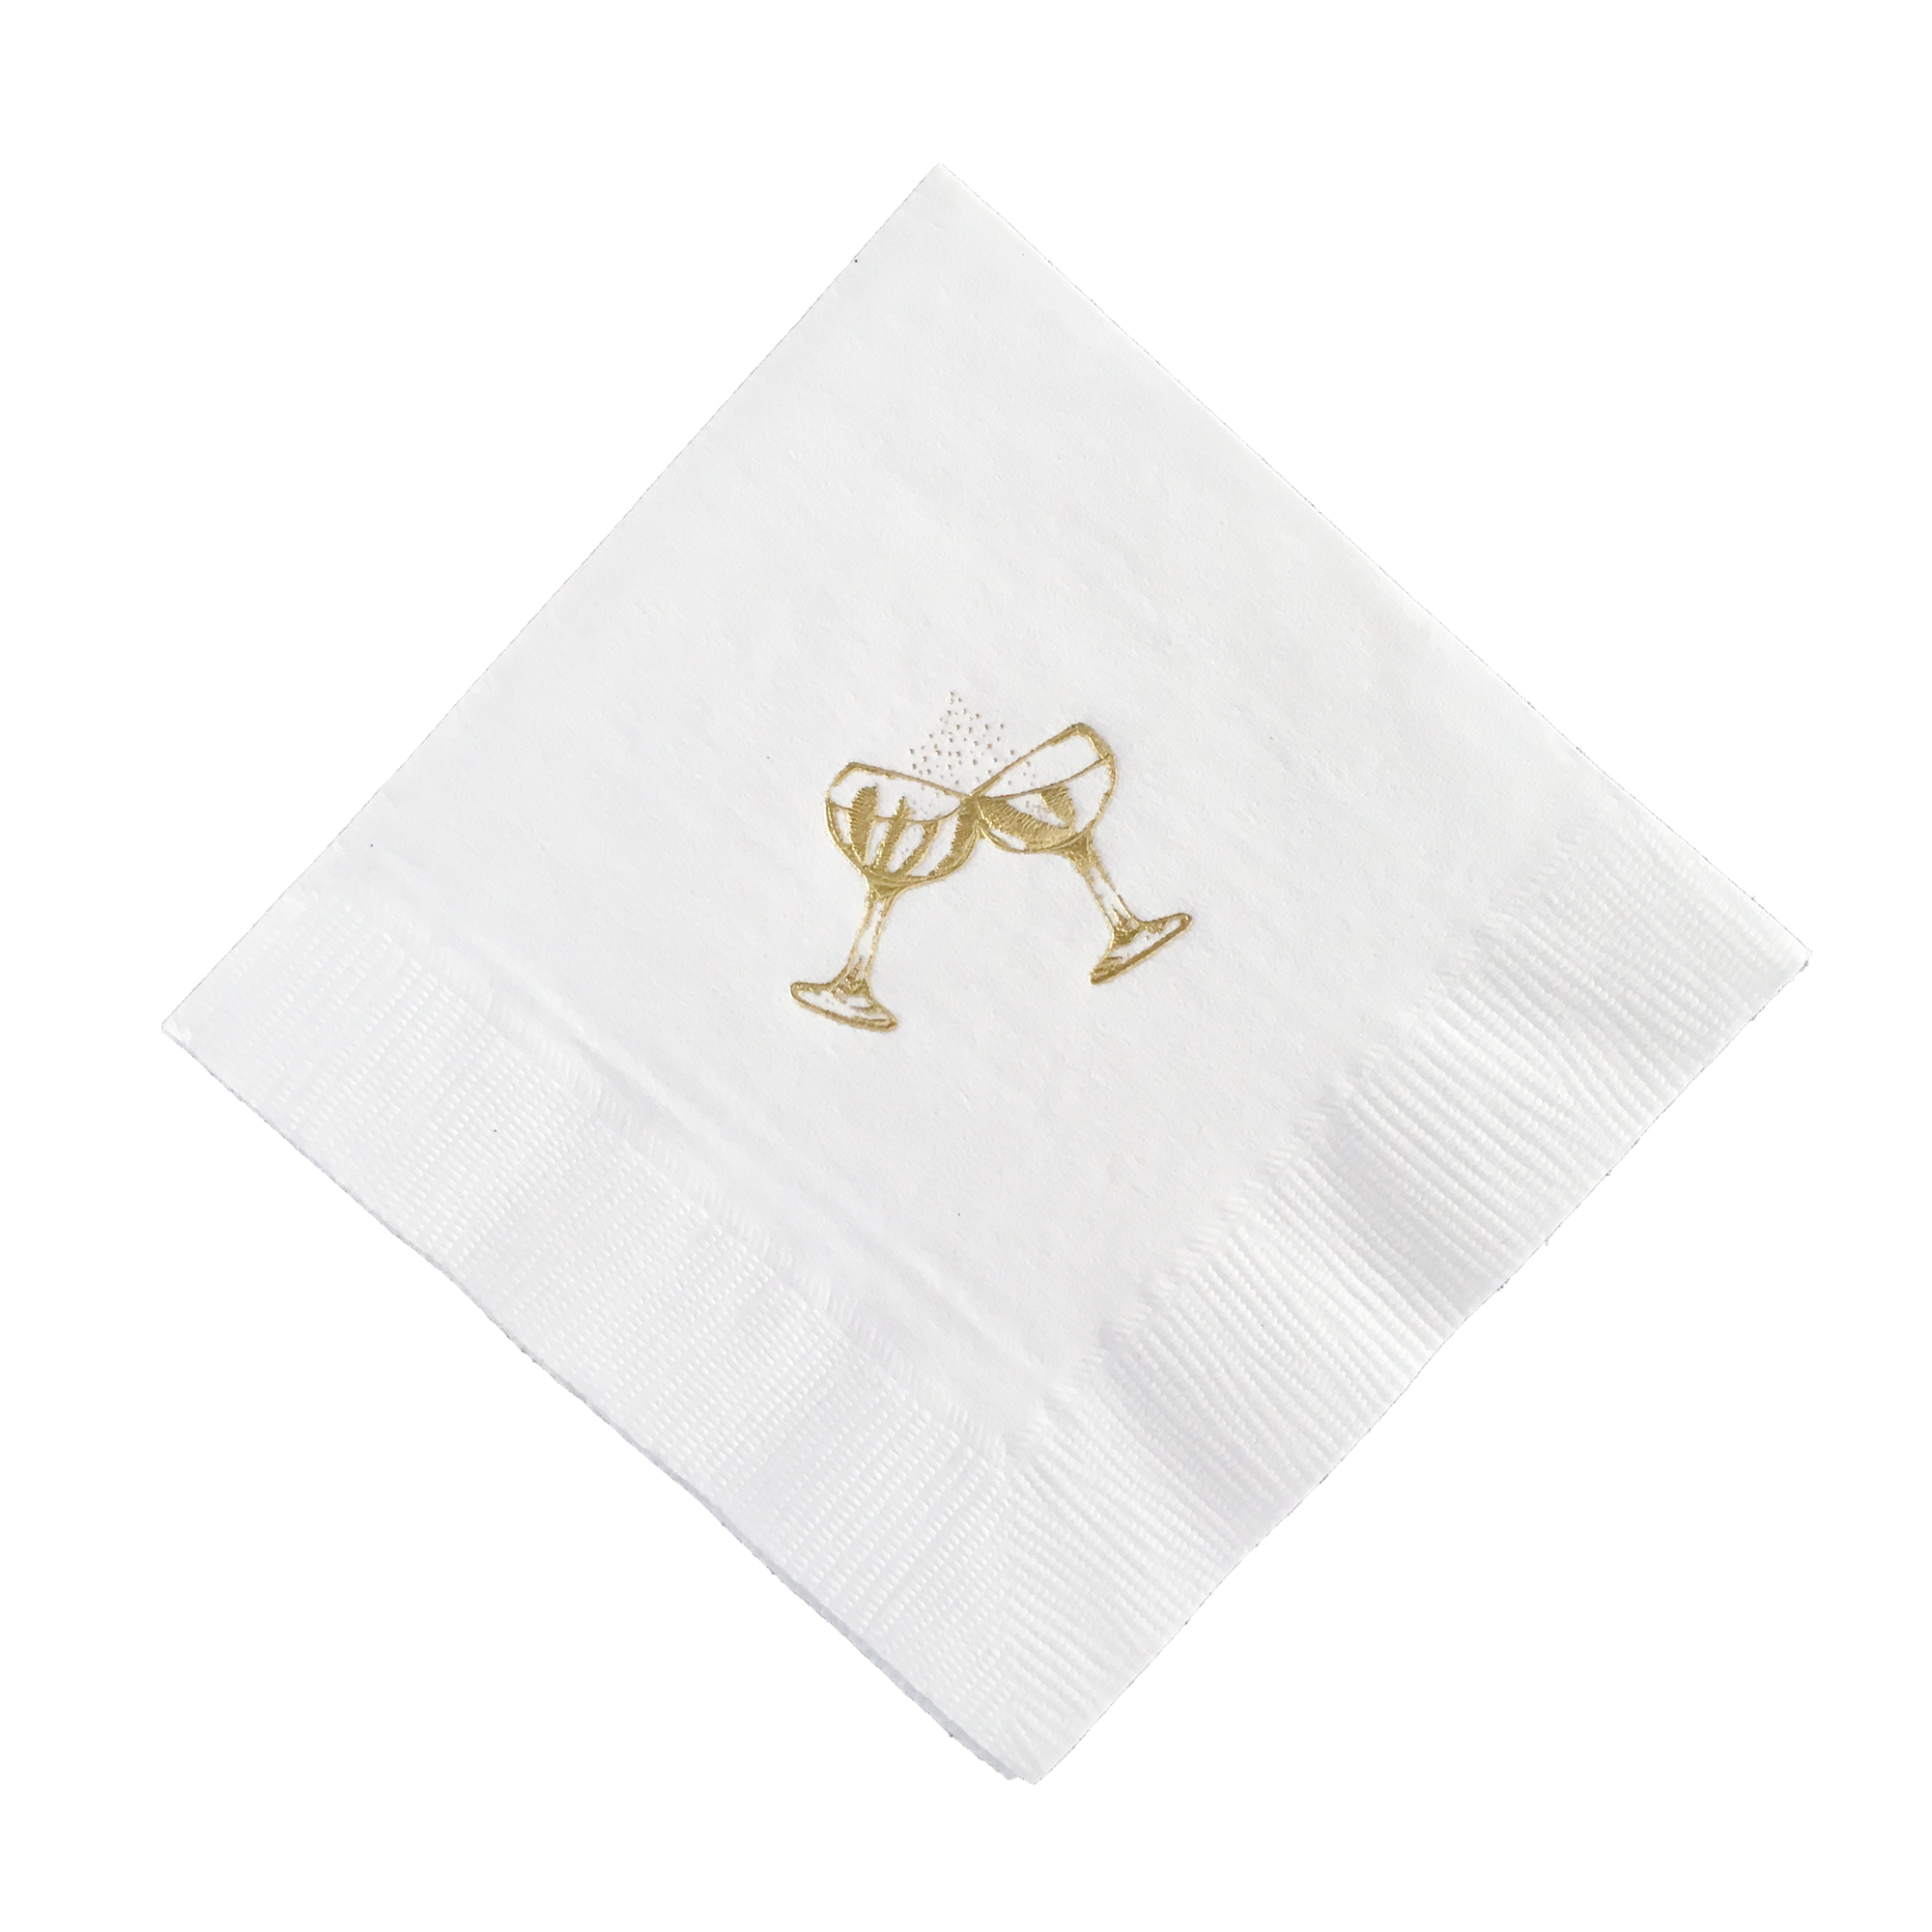 Champagne Coupe Gold Foil Cocktail Napkins, Set of 25